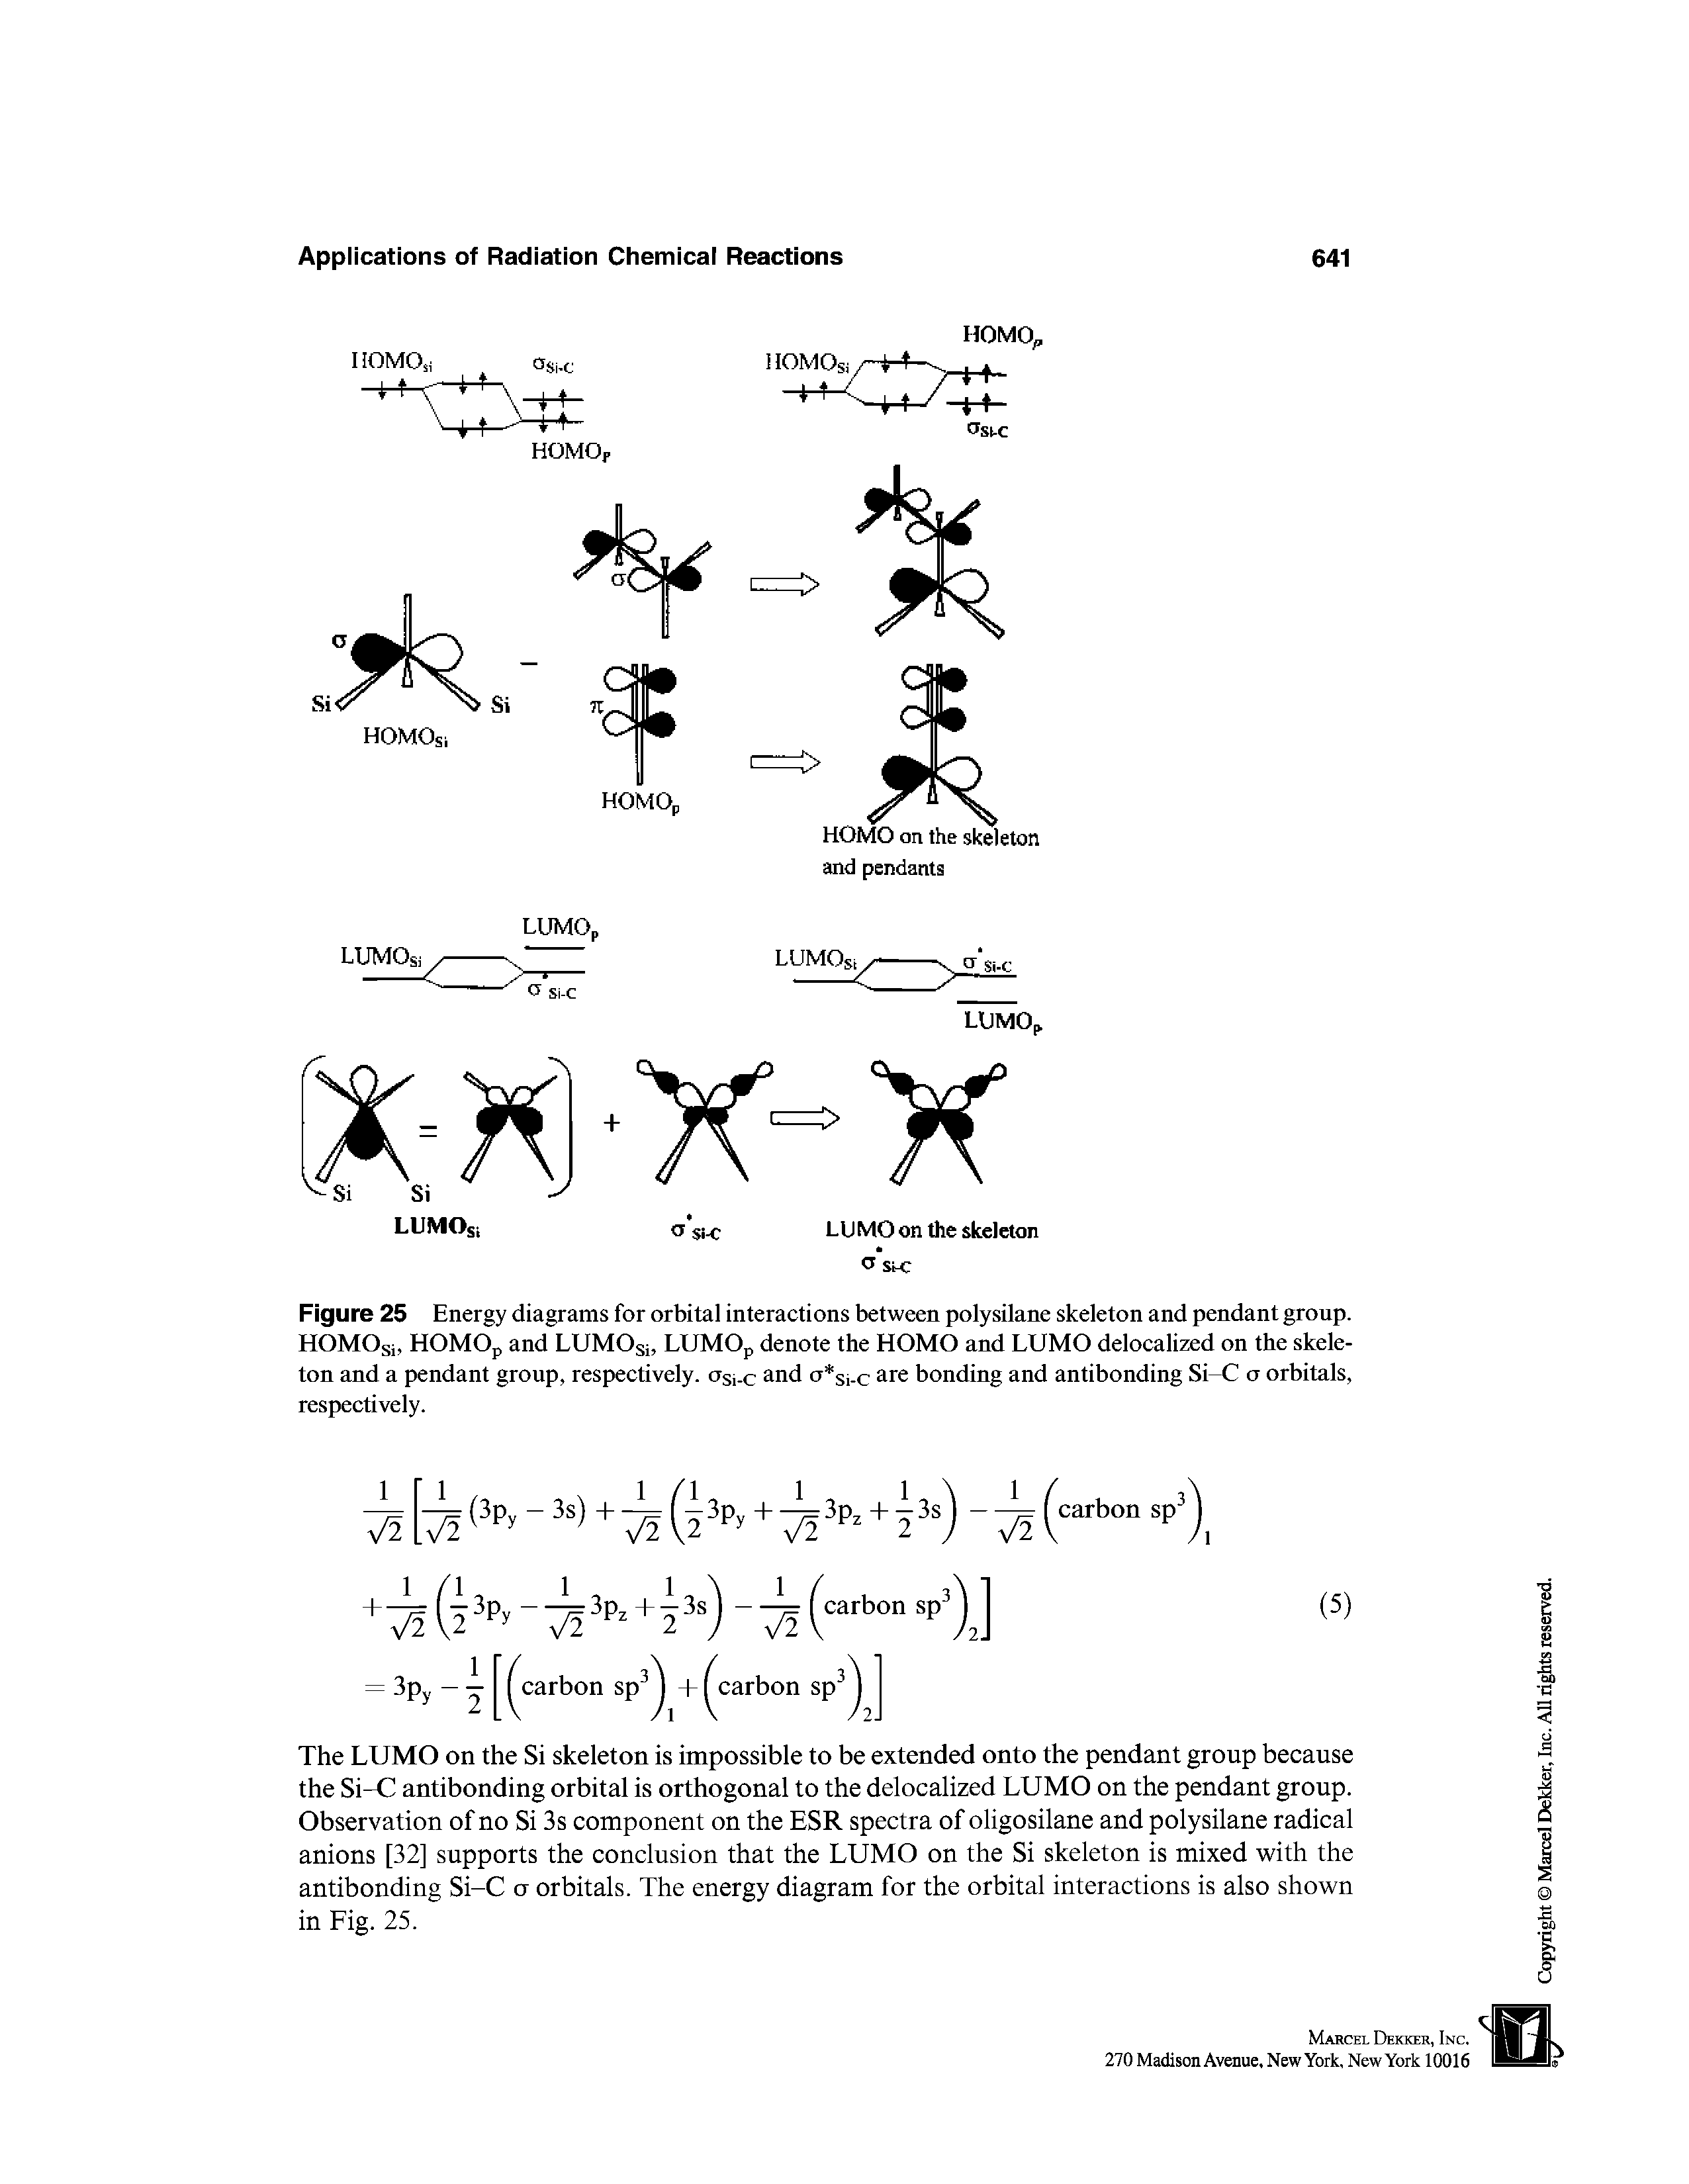 Figure 25 Energy diagrams for orbital interactions between polysilane skeleton and pendant group. HOMOsi, HOMOp and LUMOs , LUMOp denote the HOMO and LUMO delocalized on the skeleton and a pendant group, respectively, osi-c and a si-c are bonding and antibonding Si-C a orbitals, respectively.